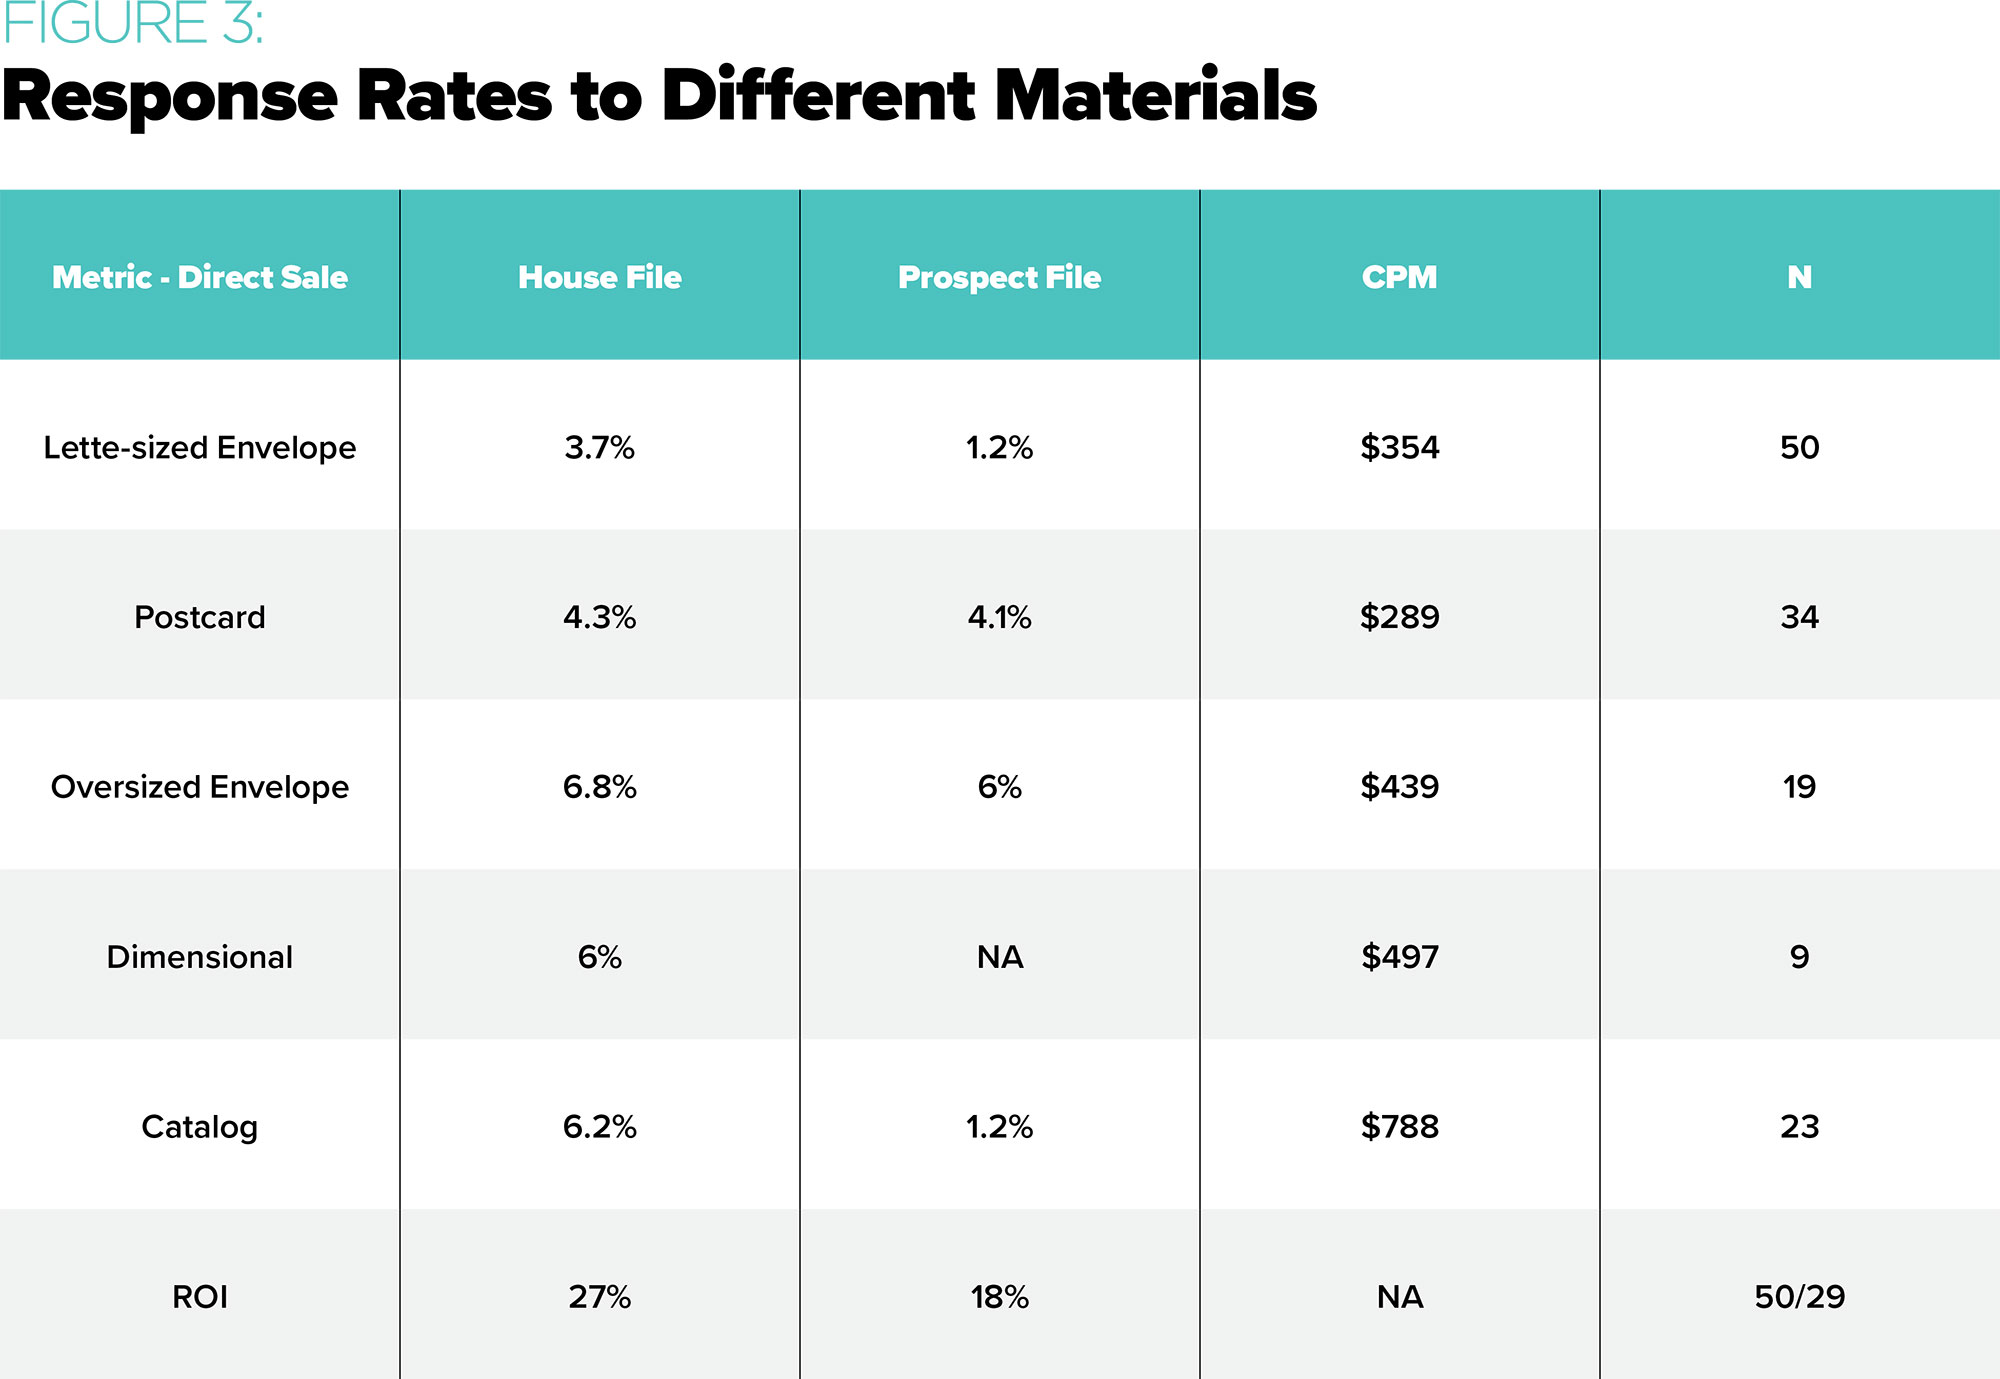 Response Rates to Different Materials